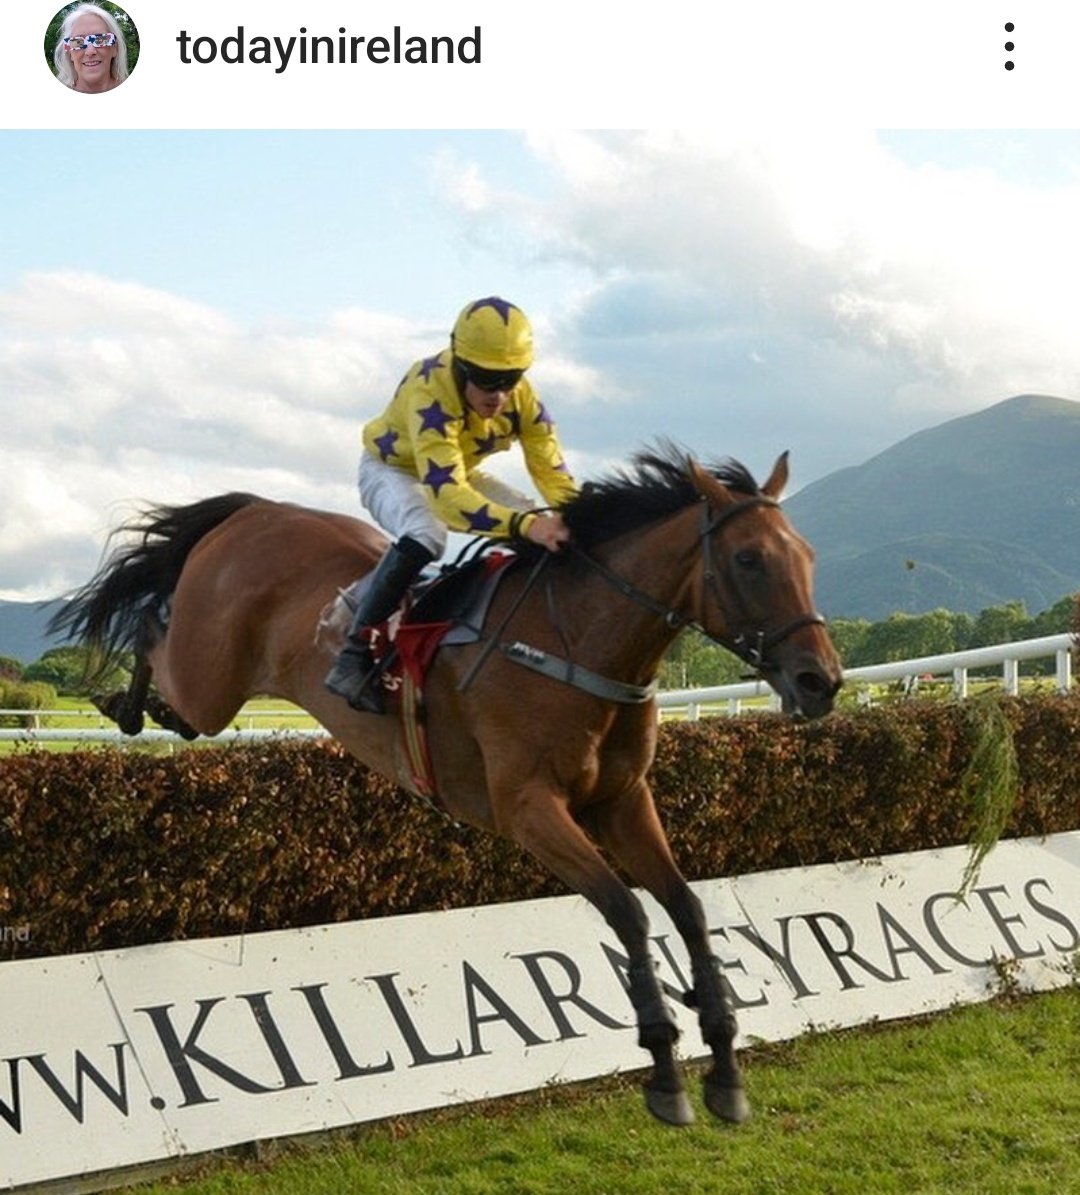 Just booked a room at The Randles for tomorrow's Killarney Races meeting! So psyched horse racing is back -- it must be summer!! @KillarneyRaces @randles_hotel